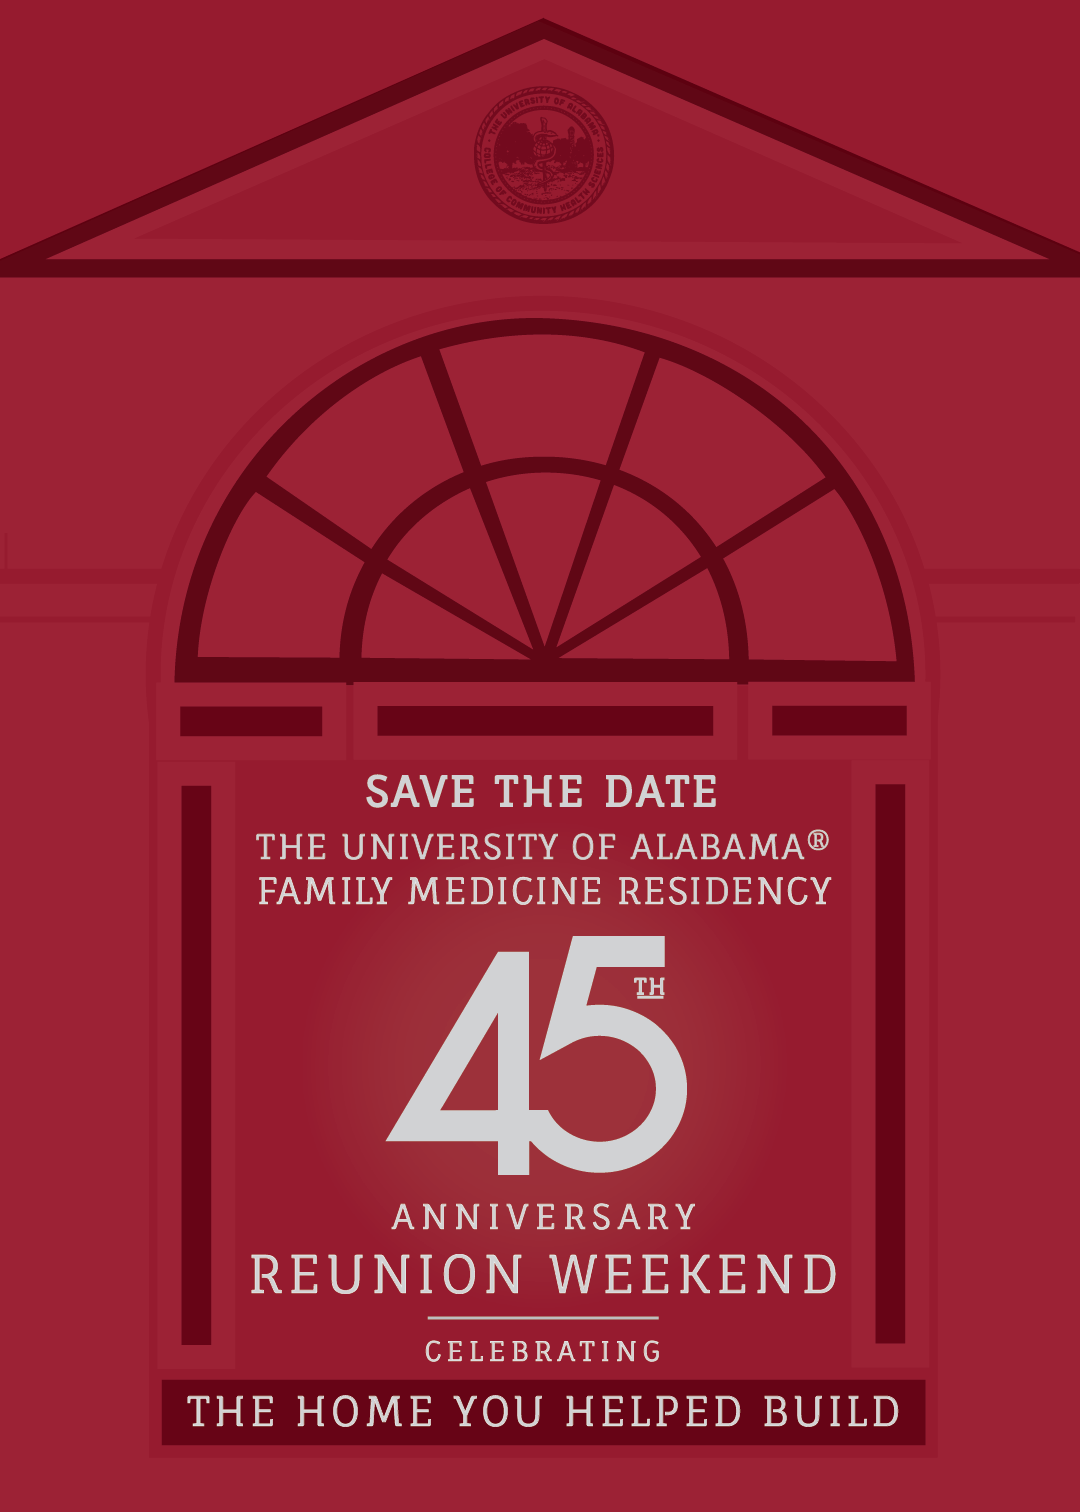 August 28-30, 2020 - Save the date University of Alabama Tuscaloosa Family Medicine Residency Program 45th Anniversary Reunion Weekend - Celebrating the house you helped build.